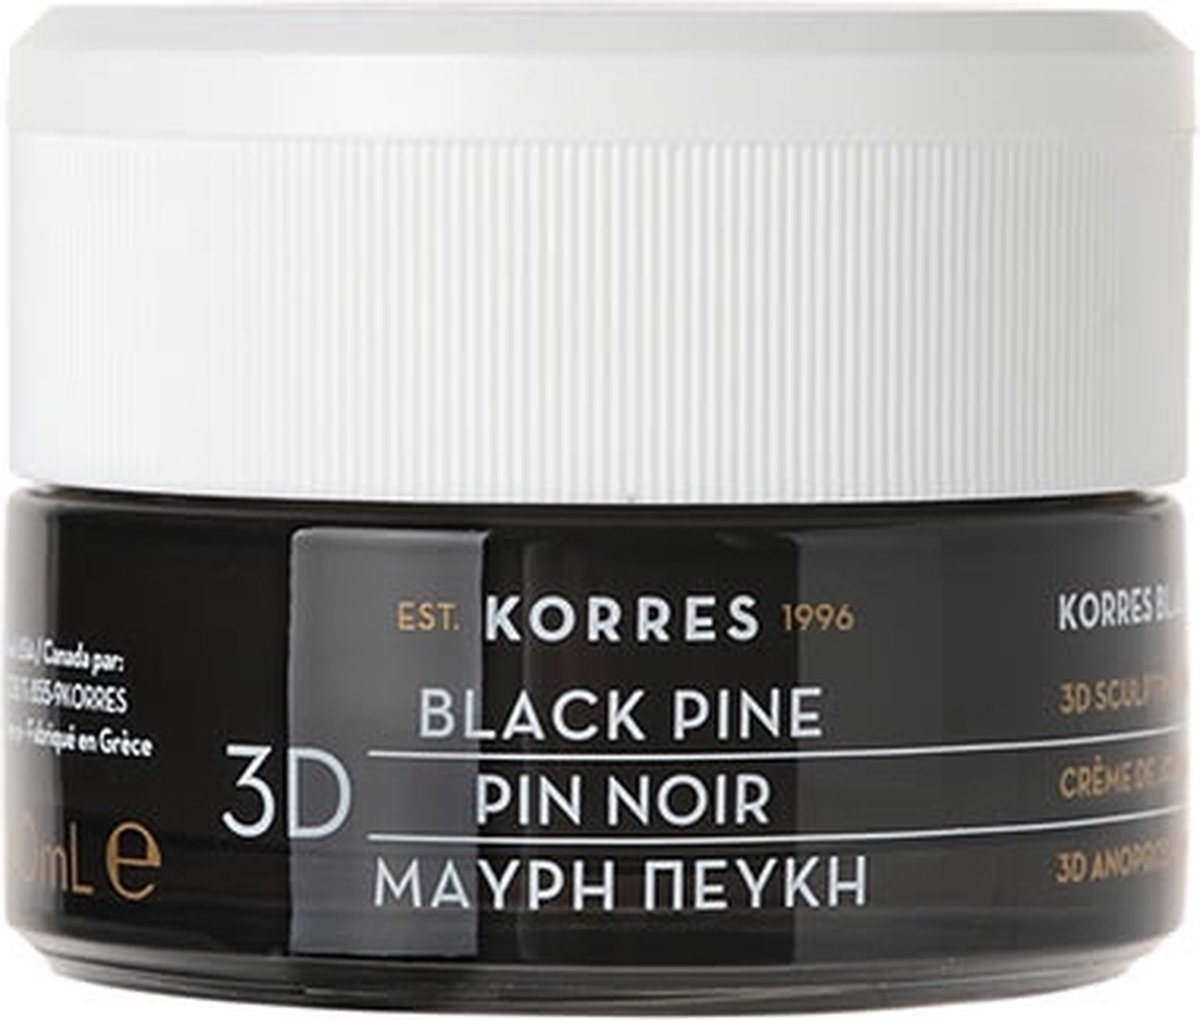 Korres 3d Sculpting, Firming & Lifting Day Cream Black Pine Normal - Combination Skin 40ml